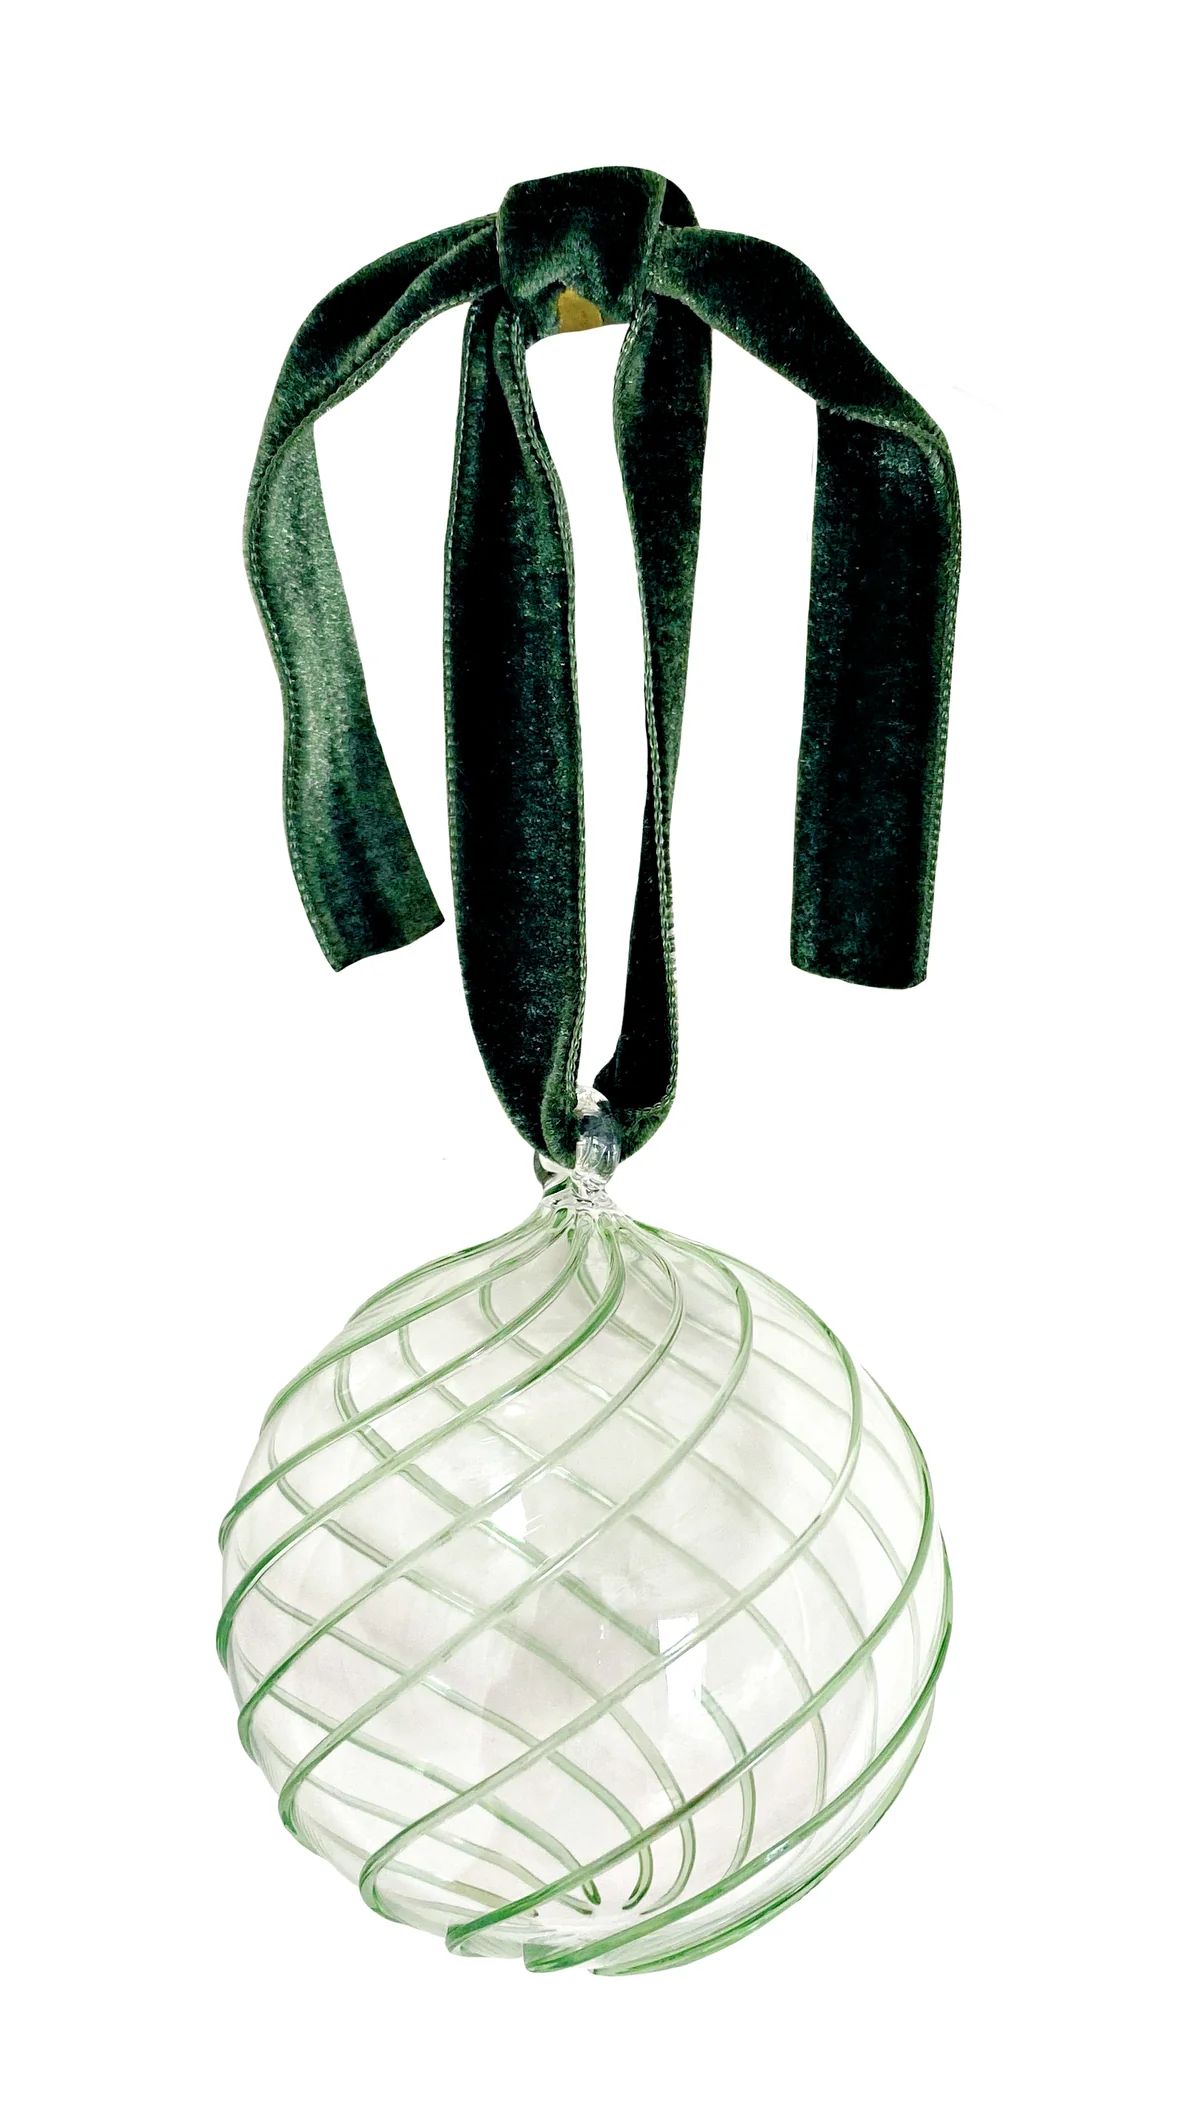 Swirl Glass Bauble in Green | Over The Moon